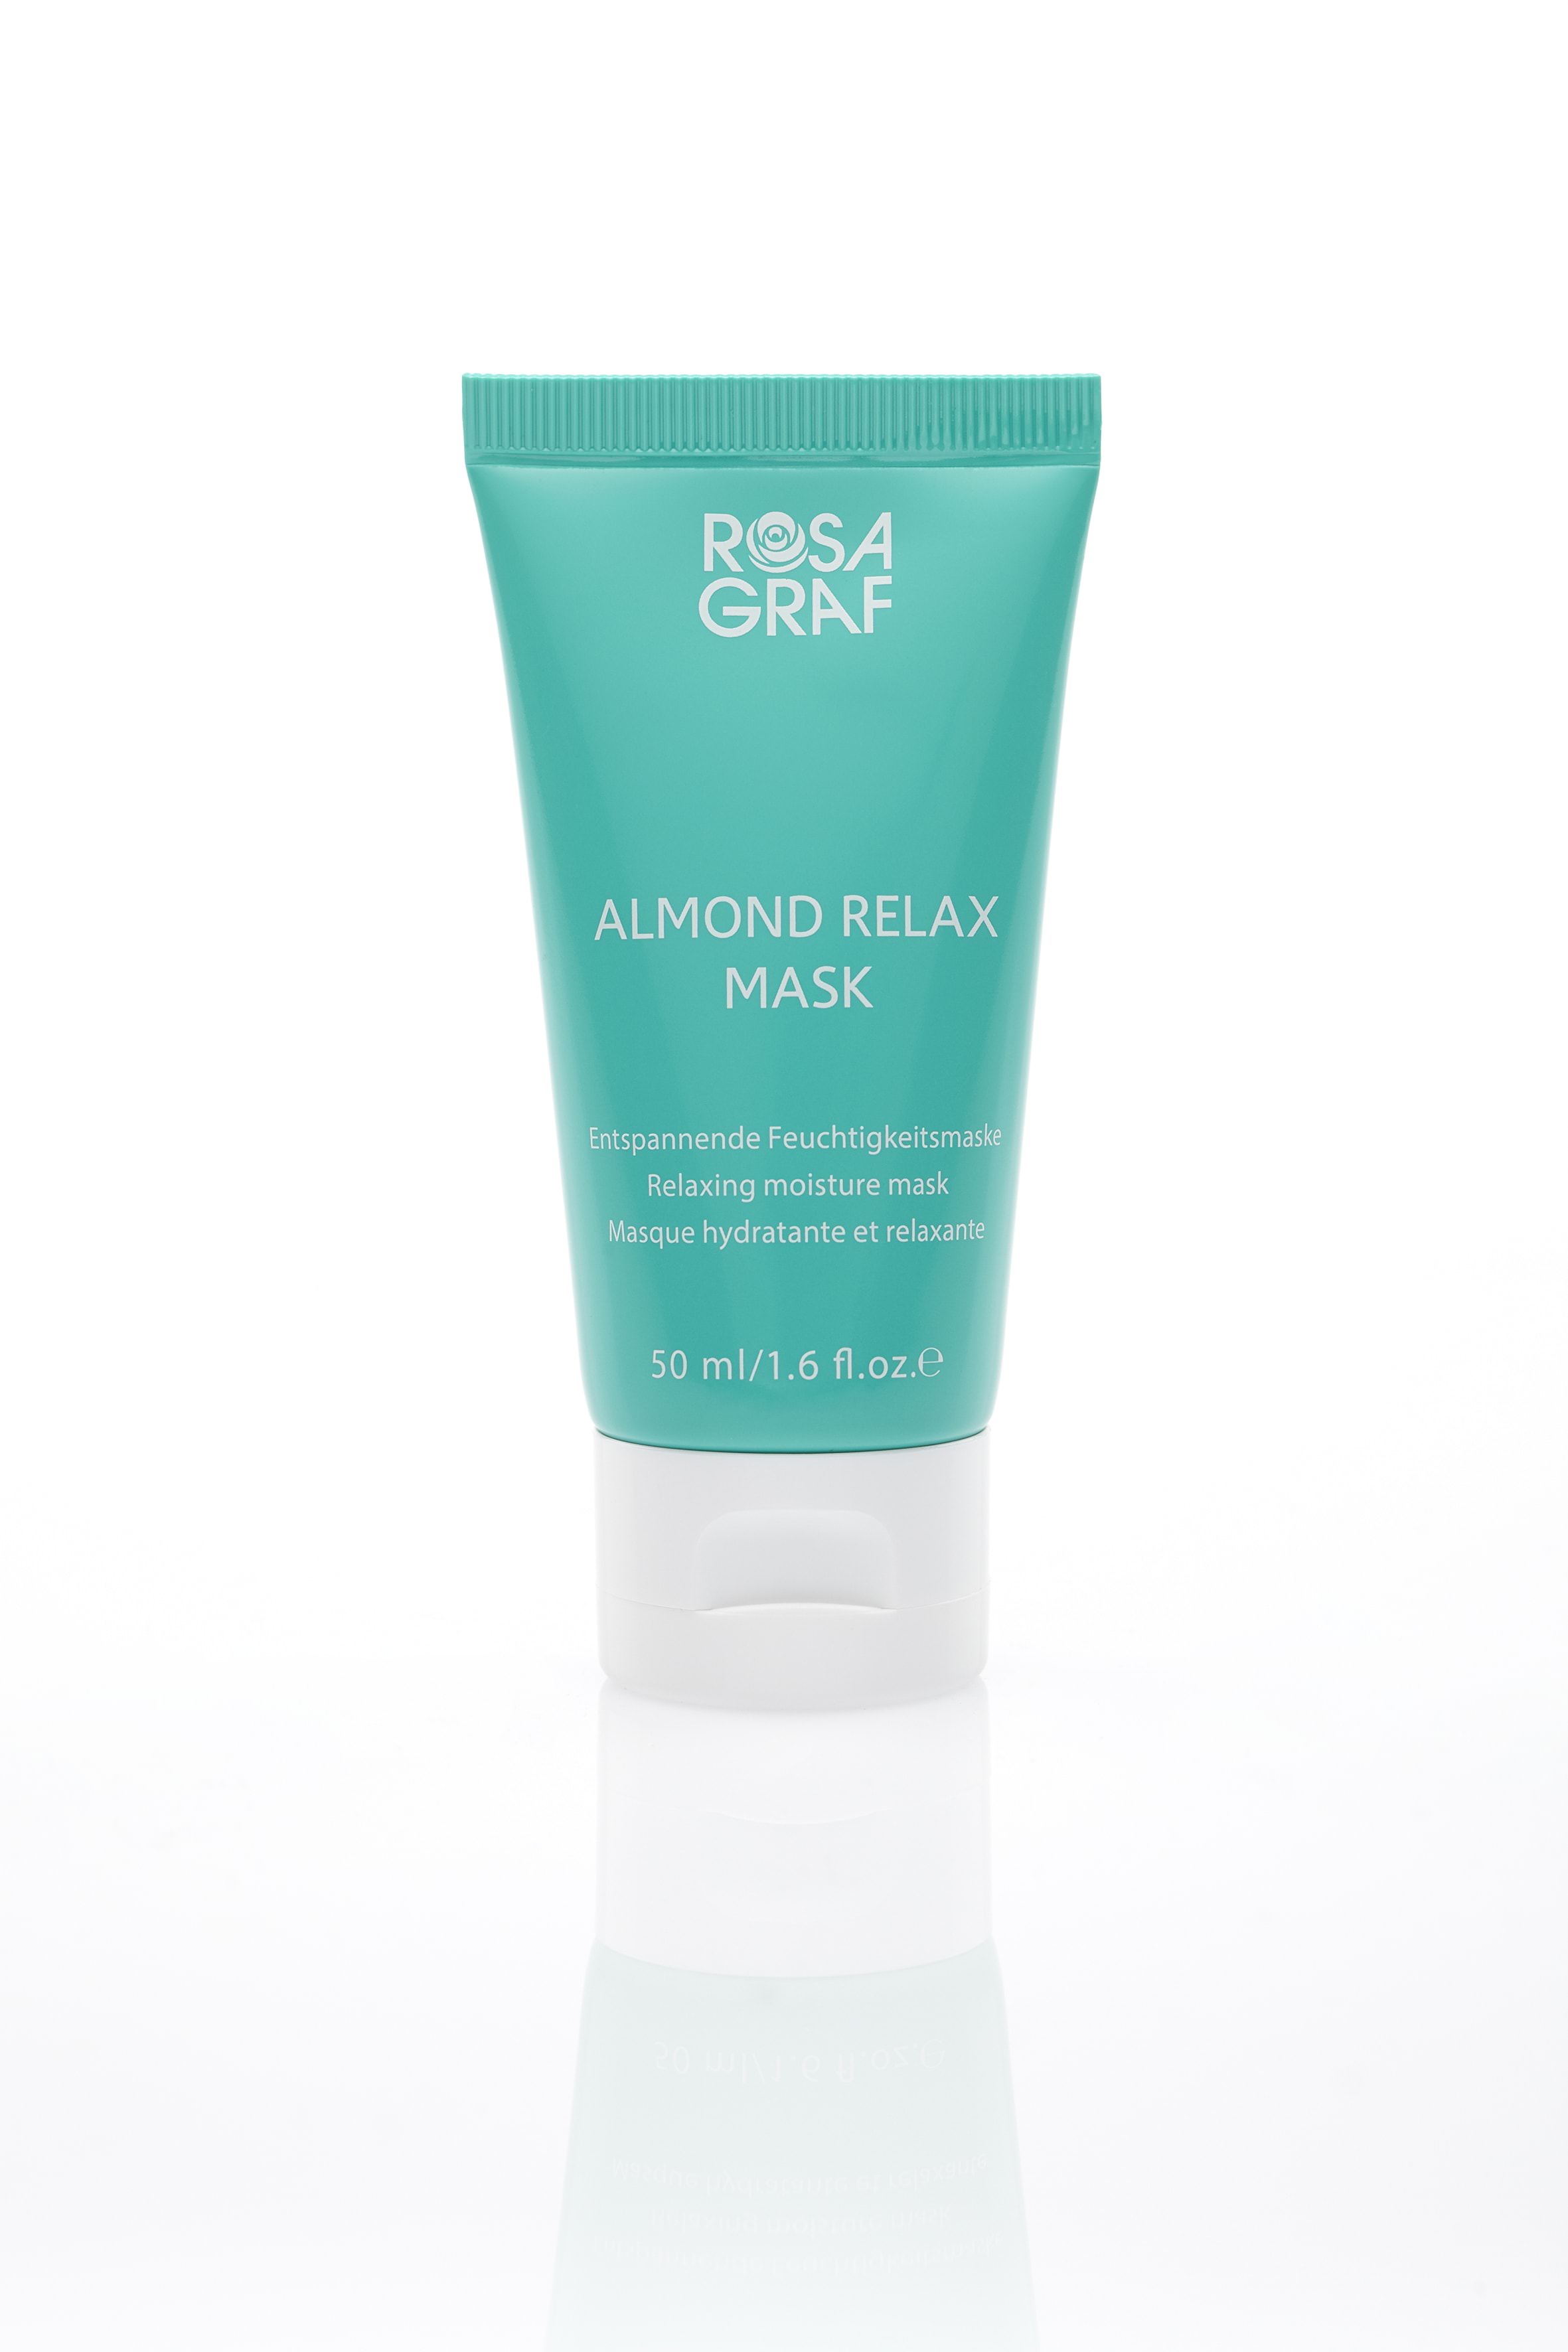 Rosa Graf Almond Relax Mask